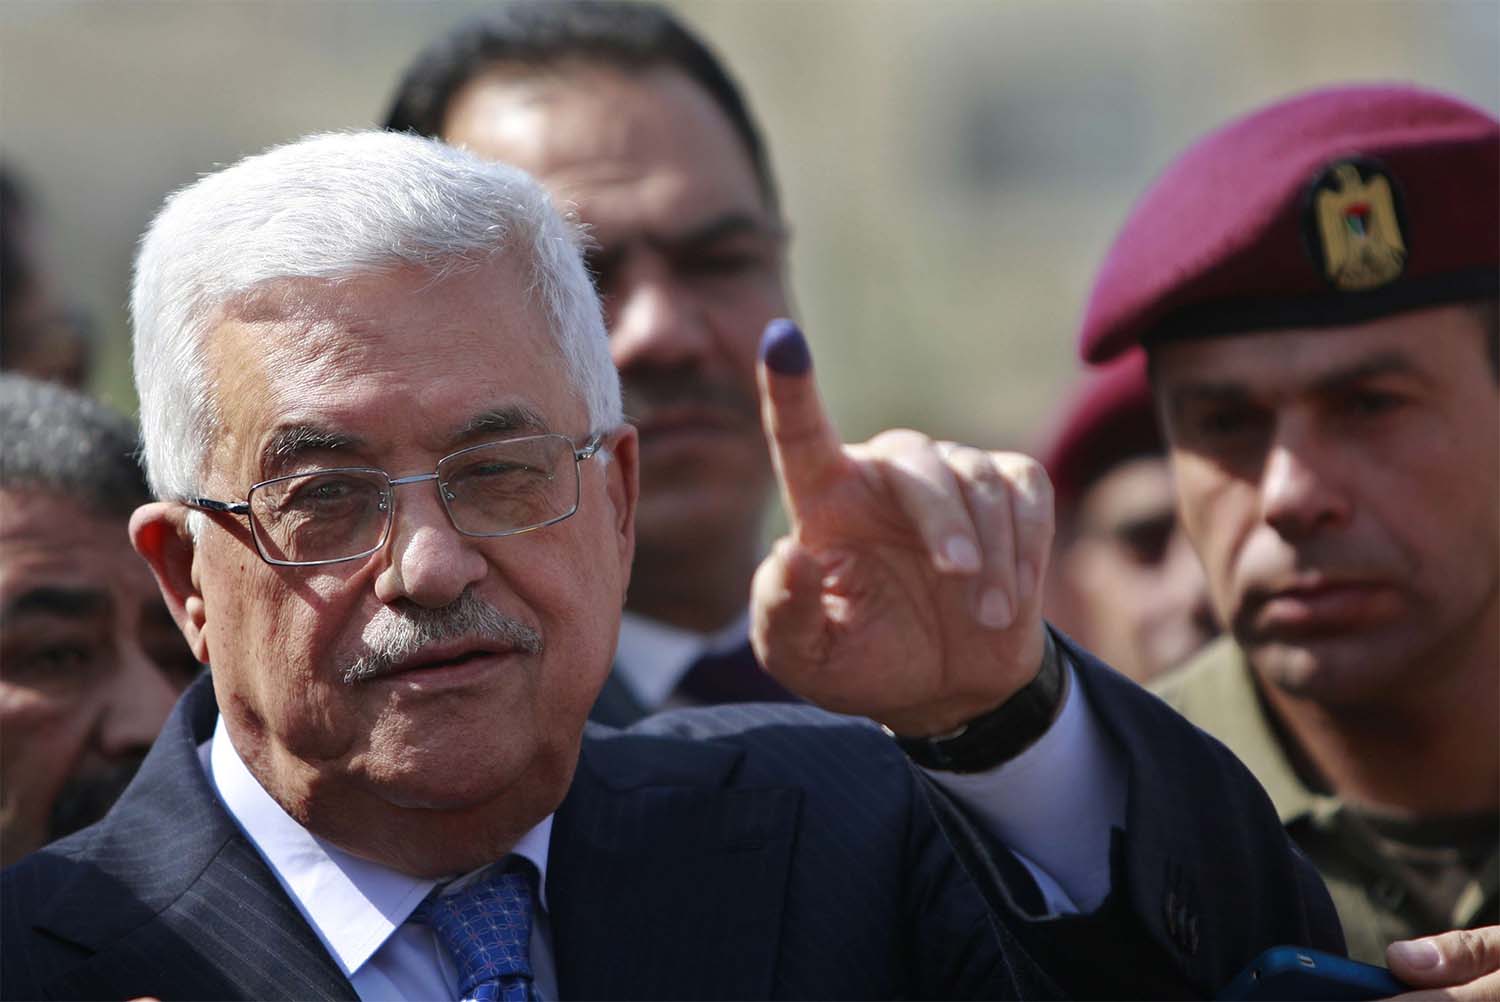 A pretext for Abbas to cancel a parliamentary election that his Fatah movement is expected to lose badly